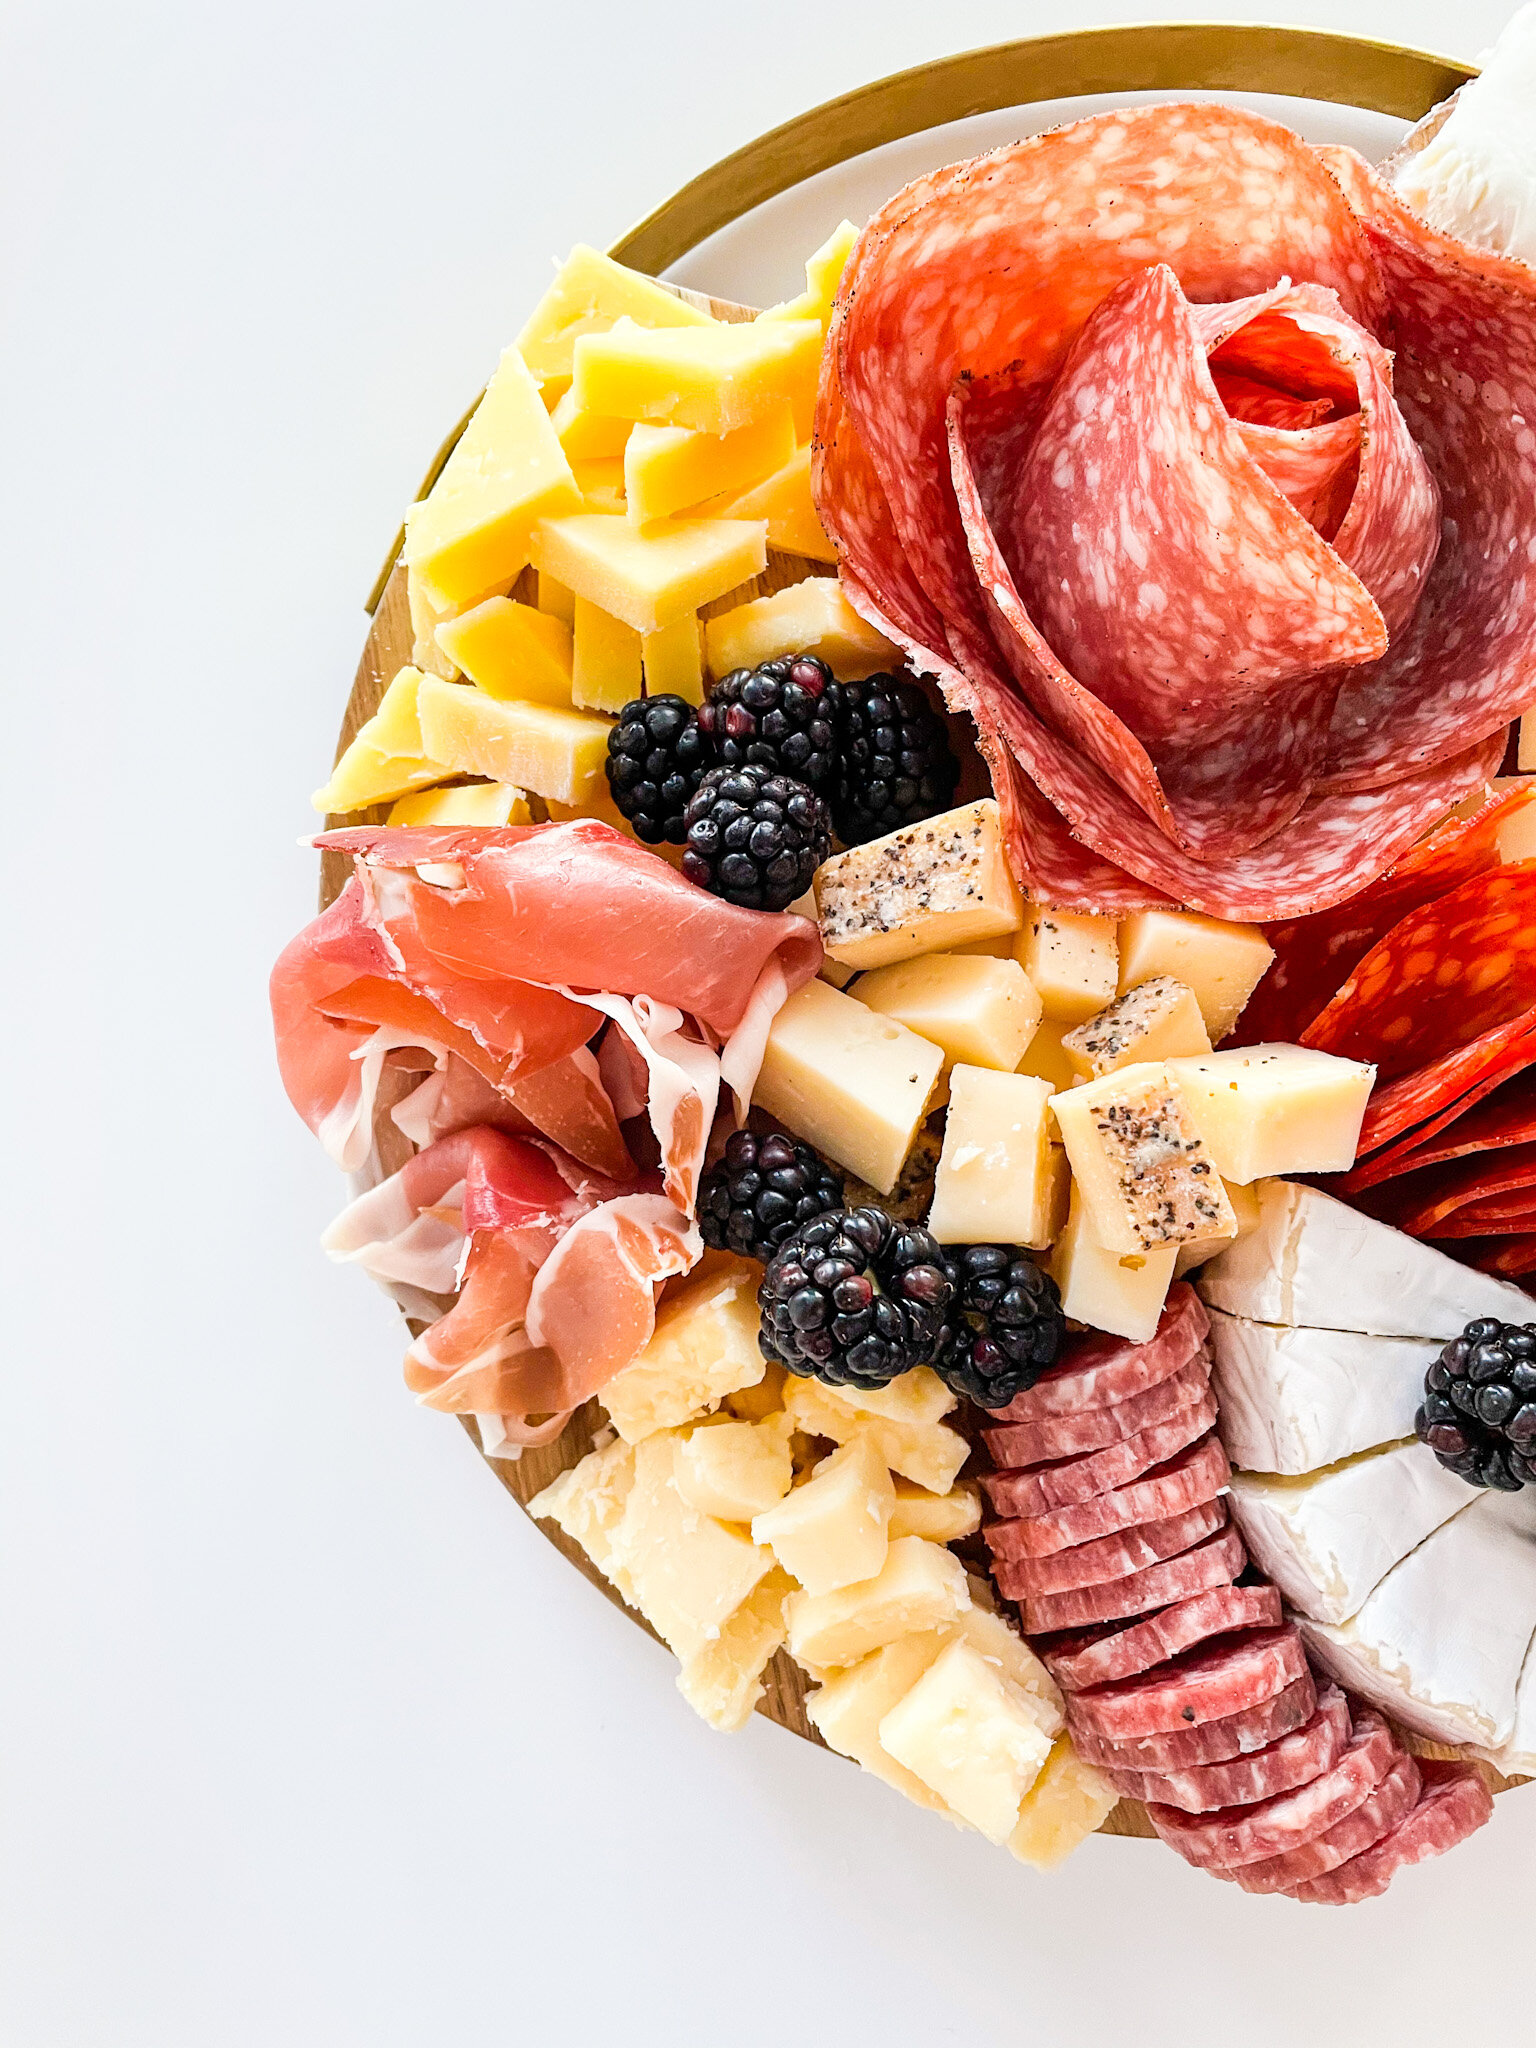 Wanderview's Epic Charcuterie Boards